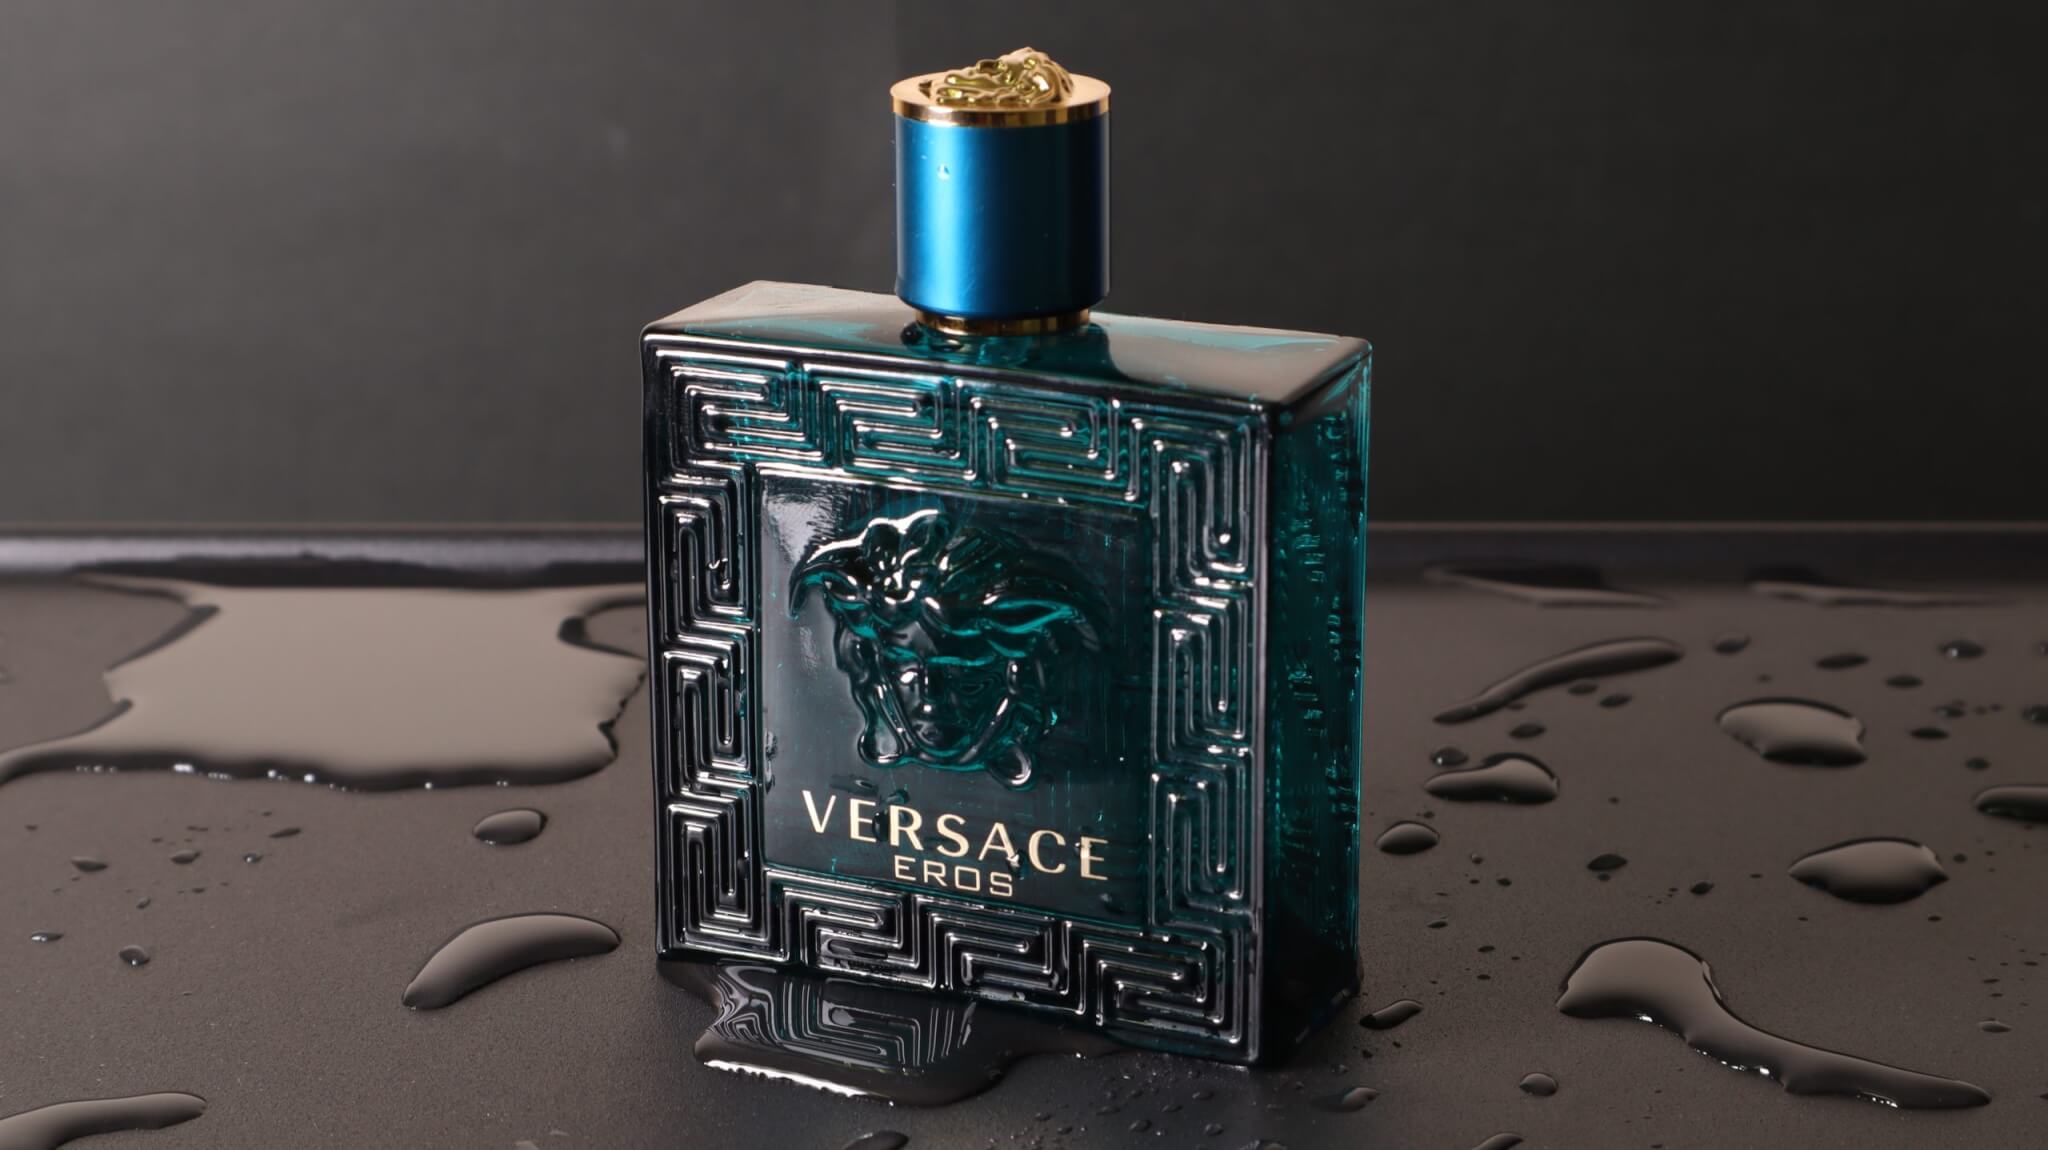 Best Men's Cologne: Top 7 Scents Most Recommended By Experts